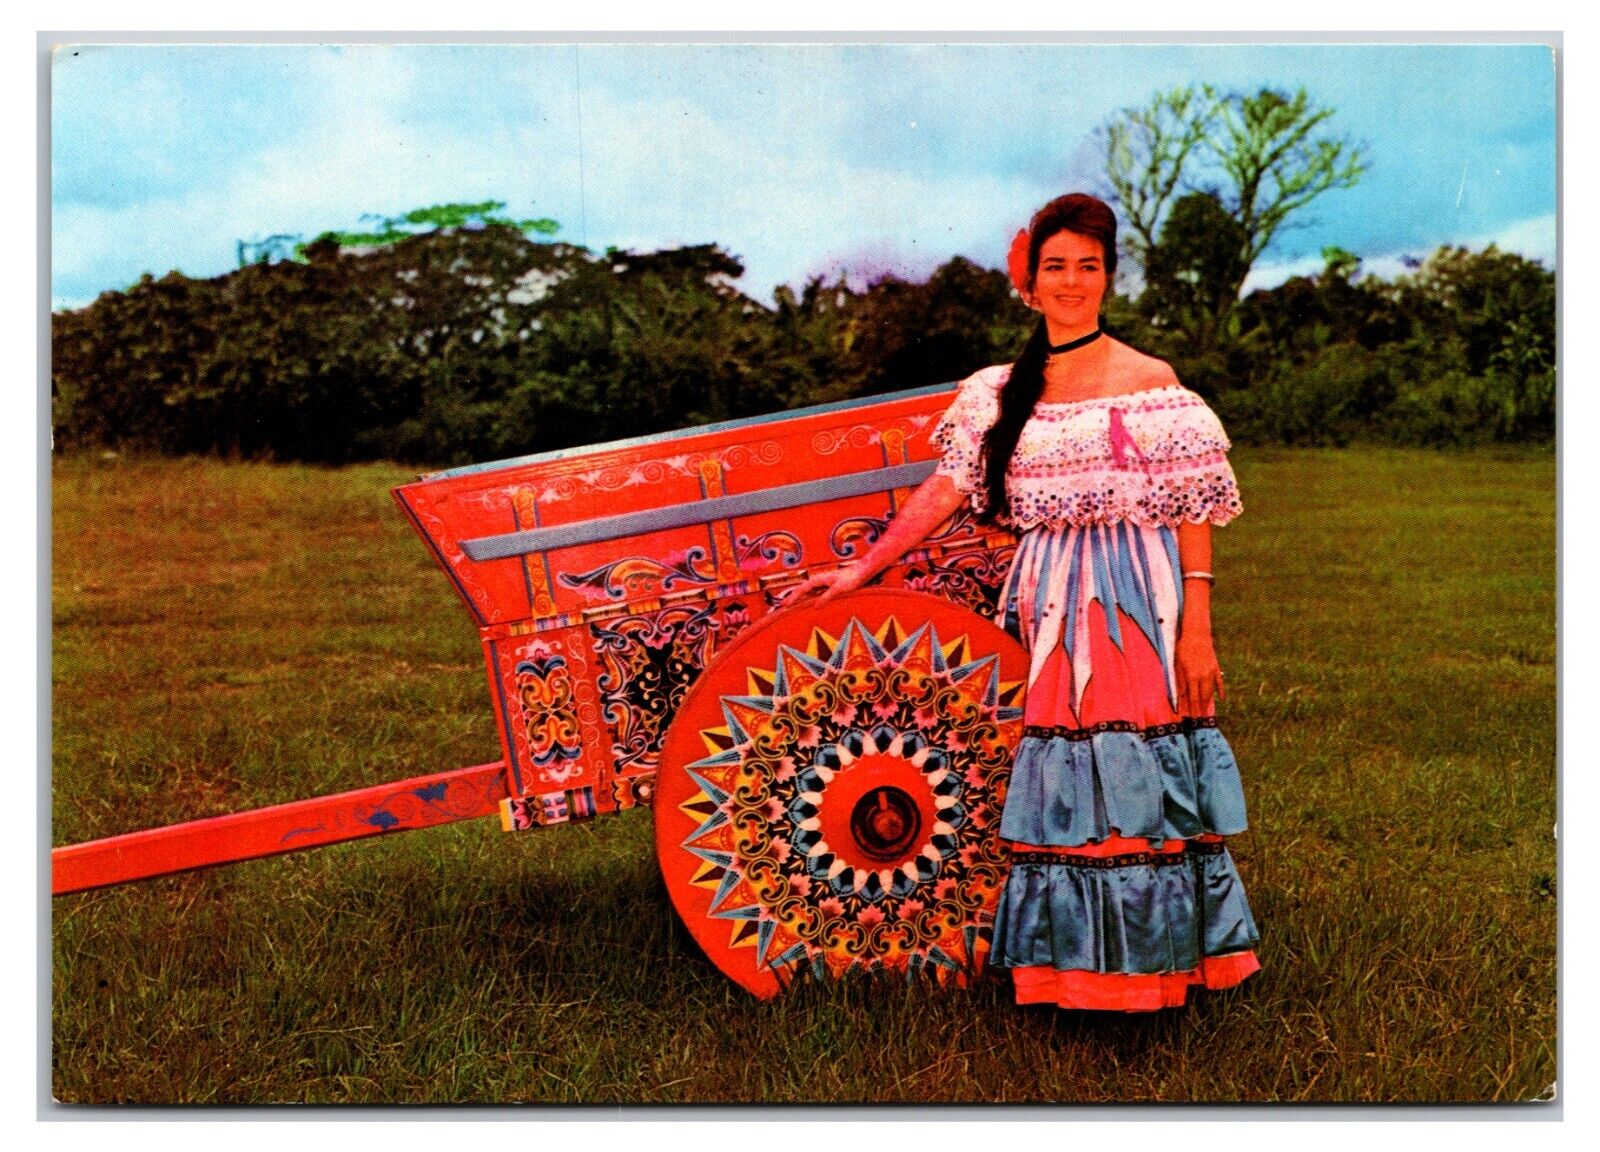 Vintage 1970s - Lady and Cart - Carreta Tipica, Costa Rica Postcard (UnPosted)